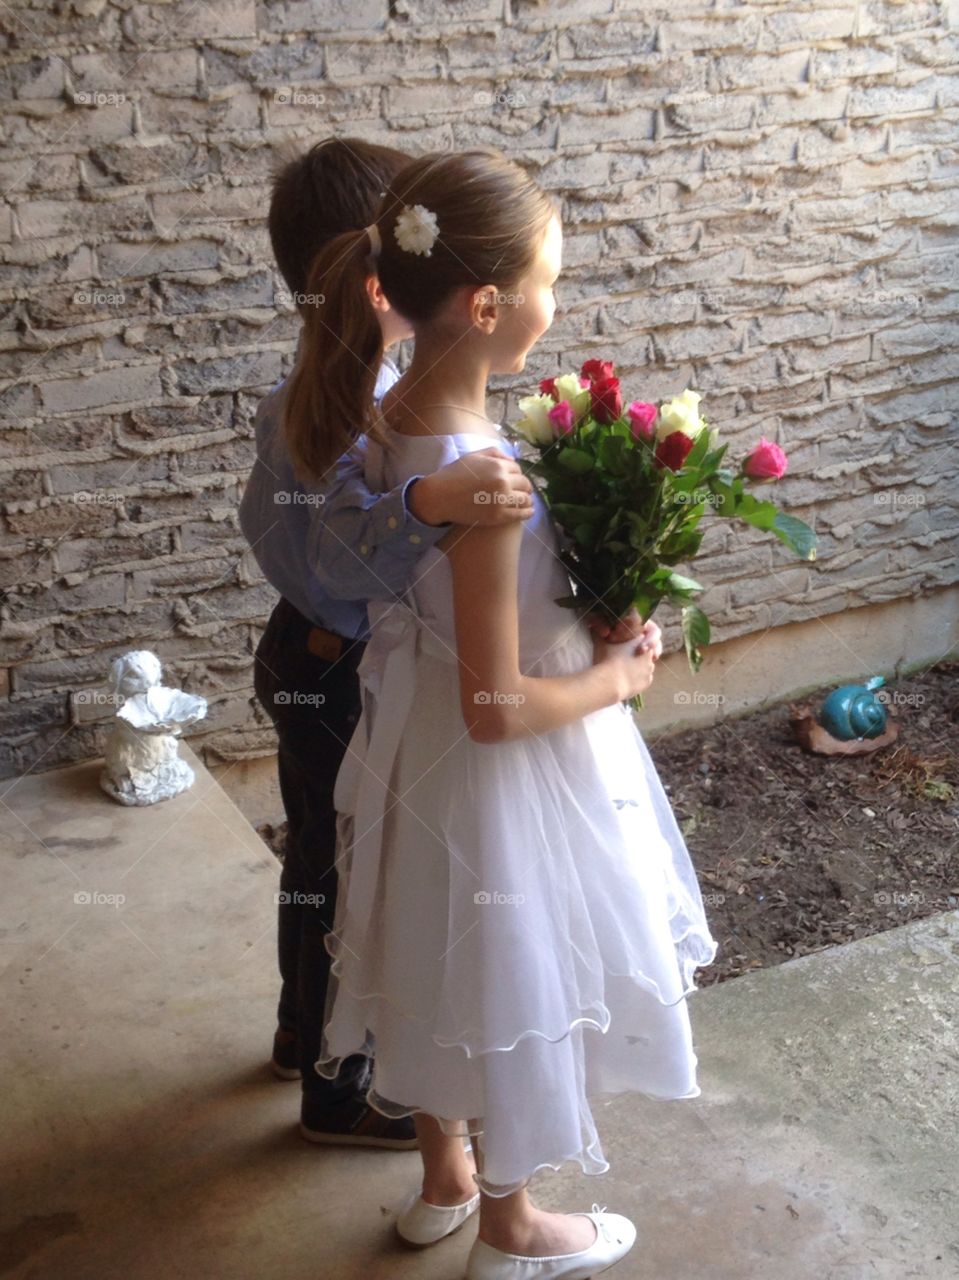 Two young Children stand close, viewed from rear side. The girl is wearing white, holding a bouquet of colourful roses, hair in a neat pony tail. They stand in an entrance way for photos. 